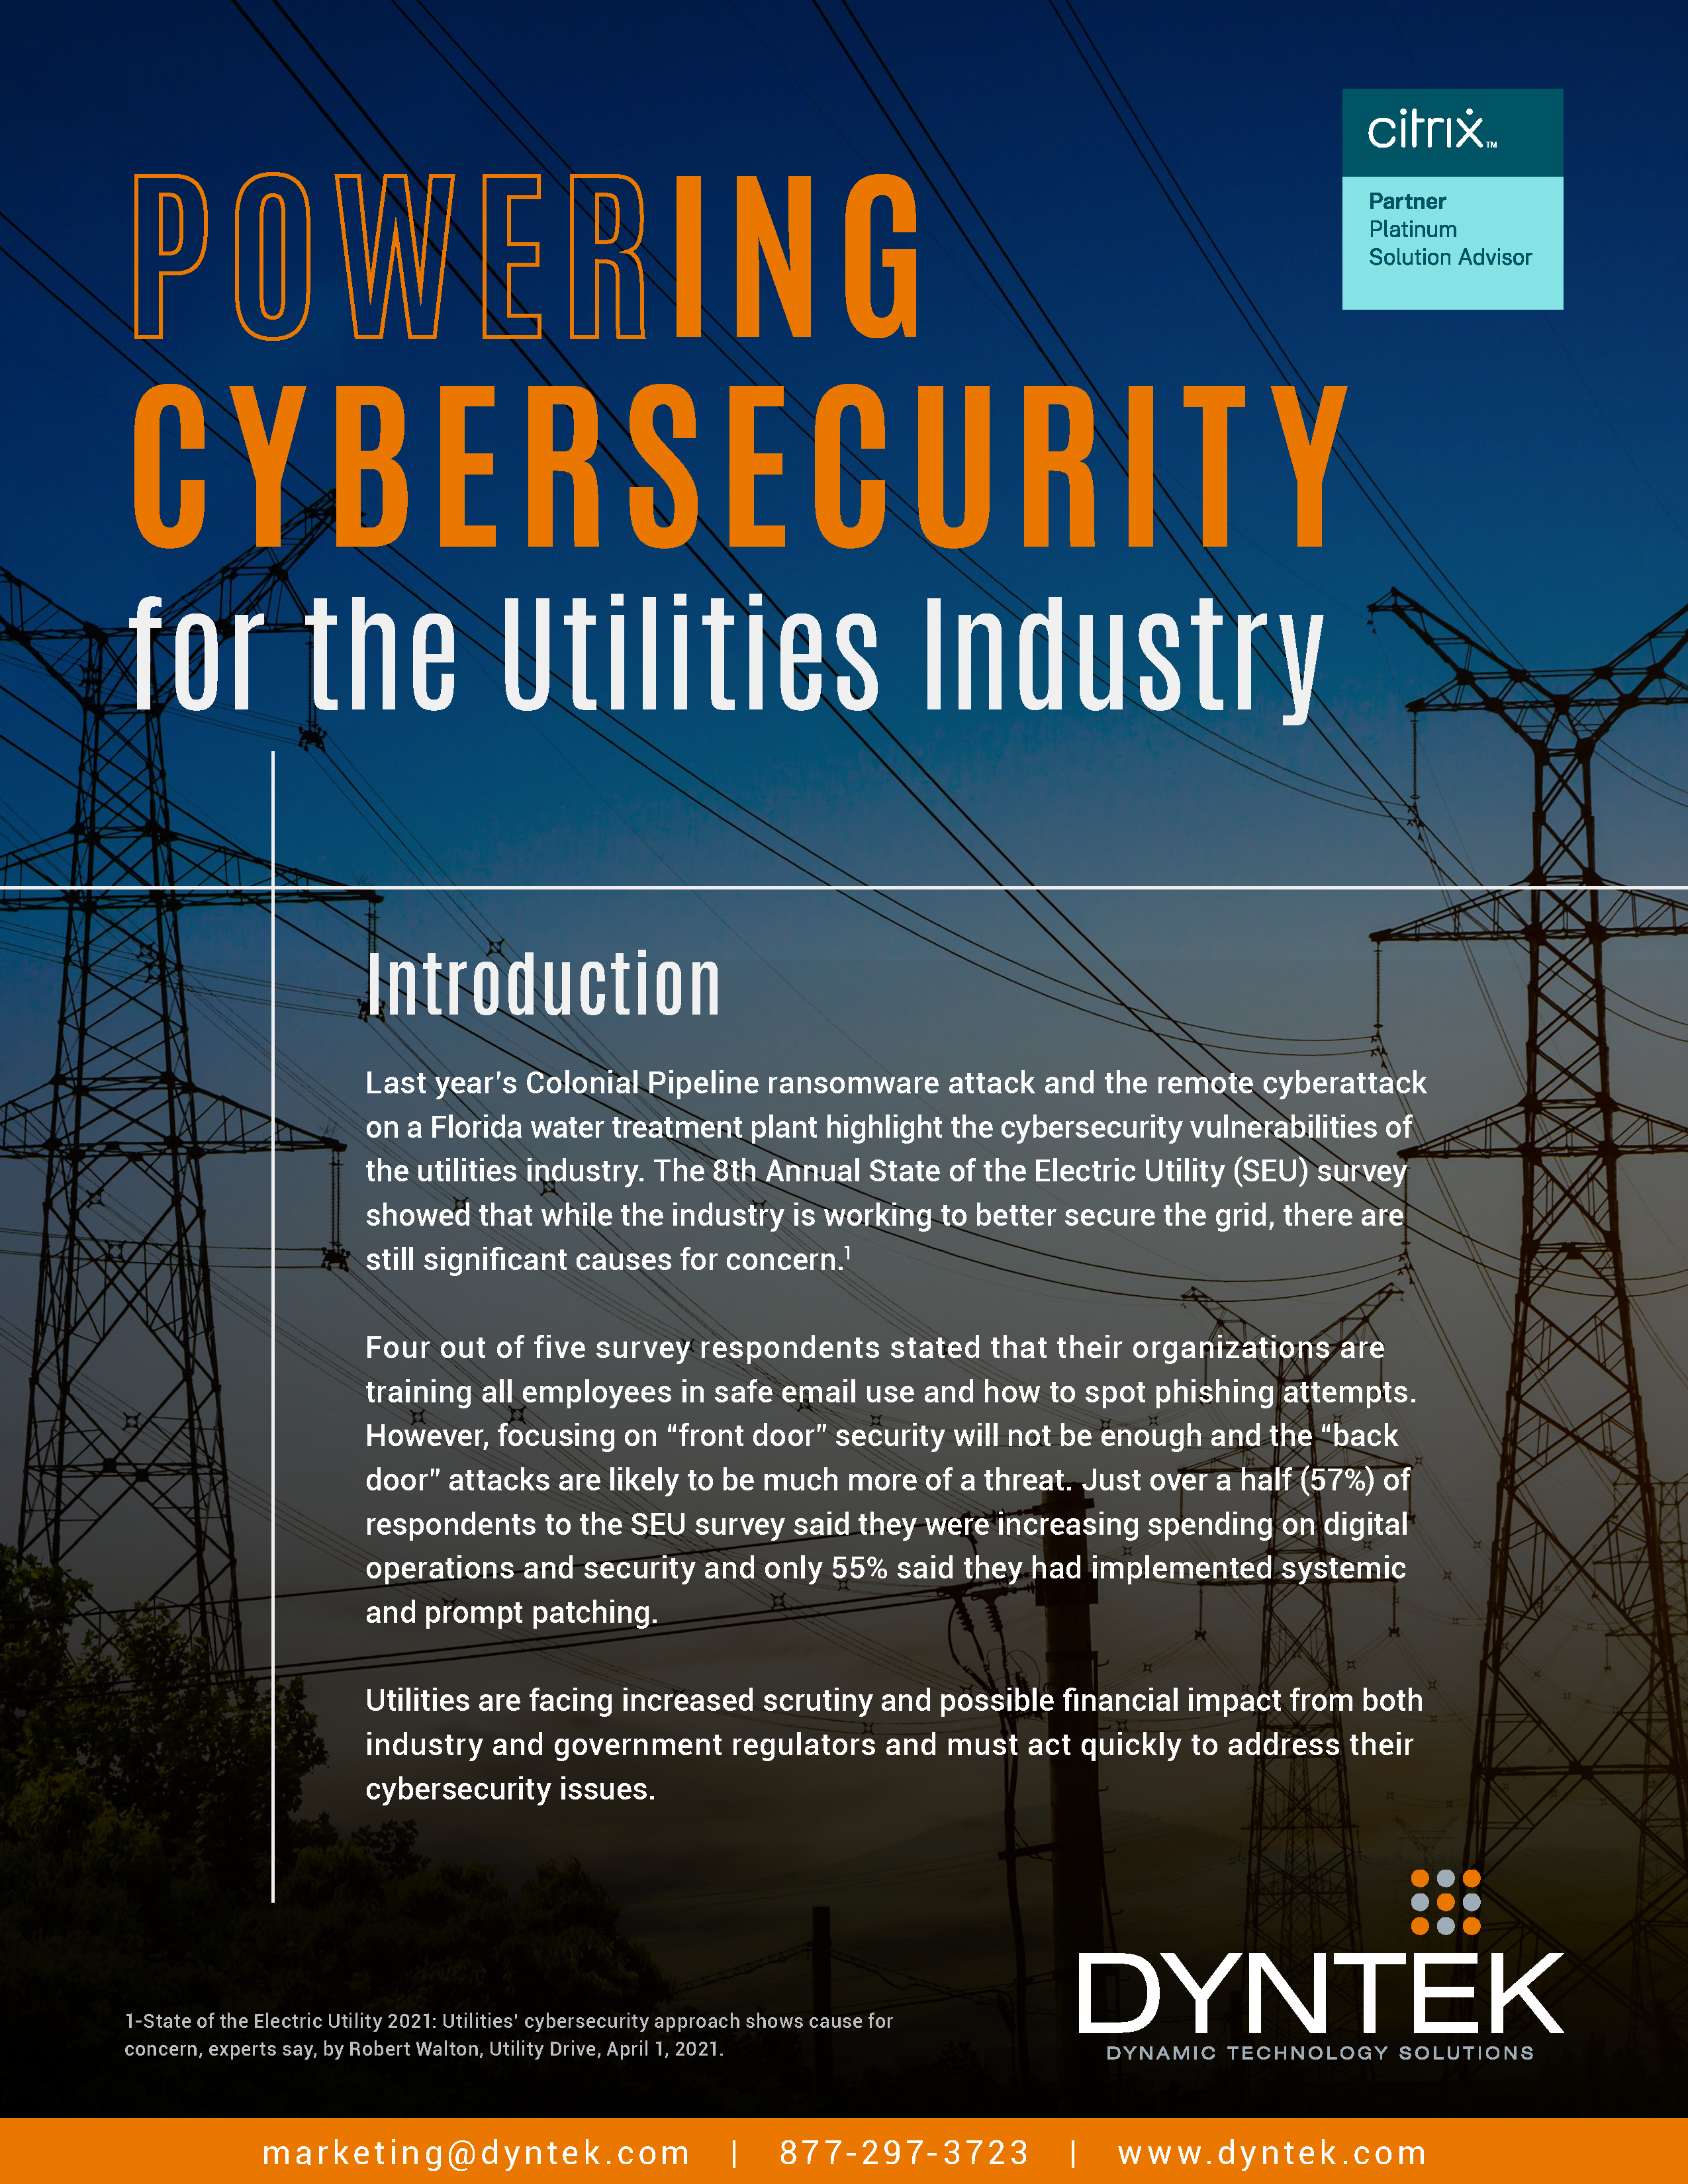 Power Cybersecurity for the Utilities Industry_DynTek_final_Page_1